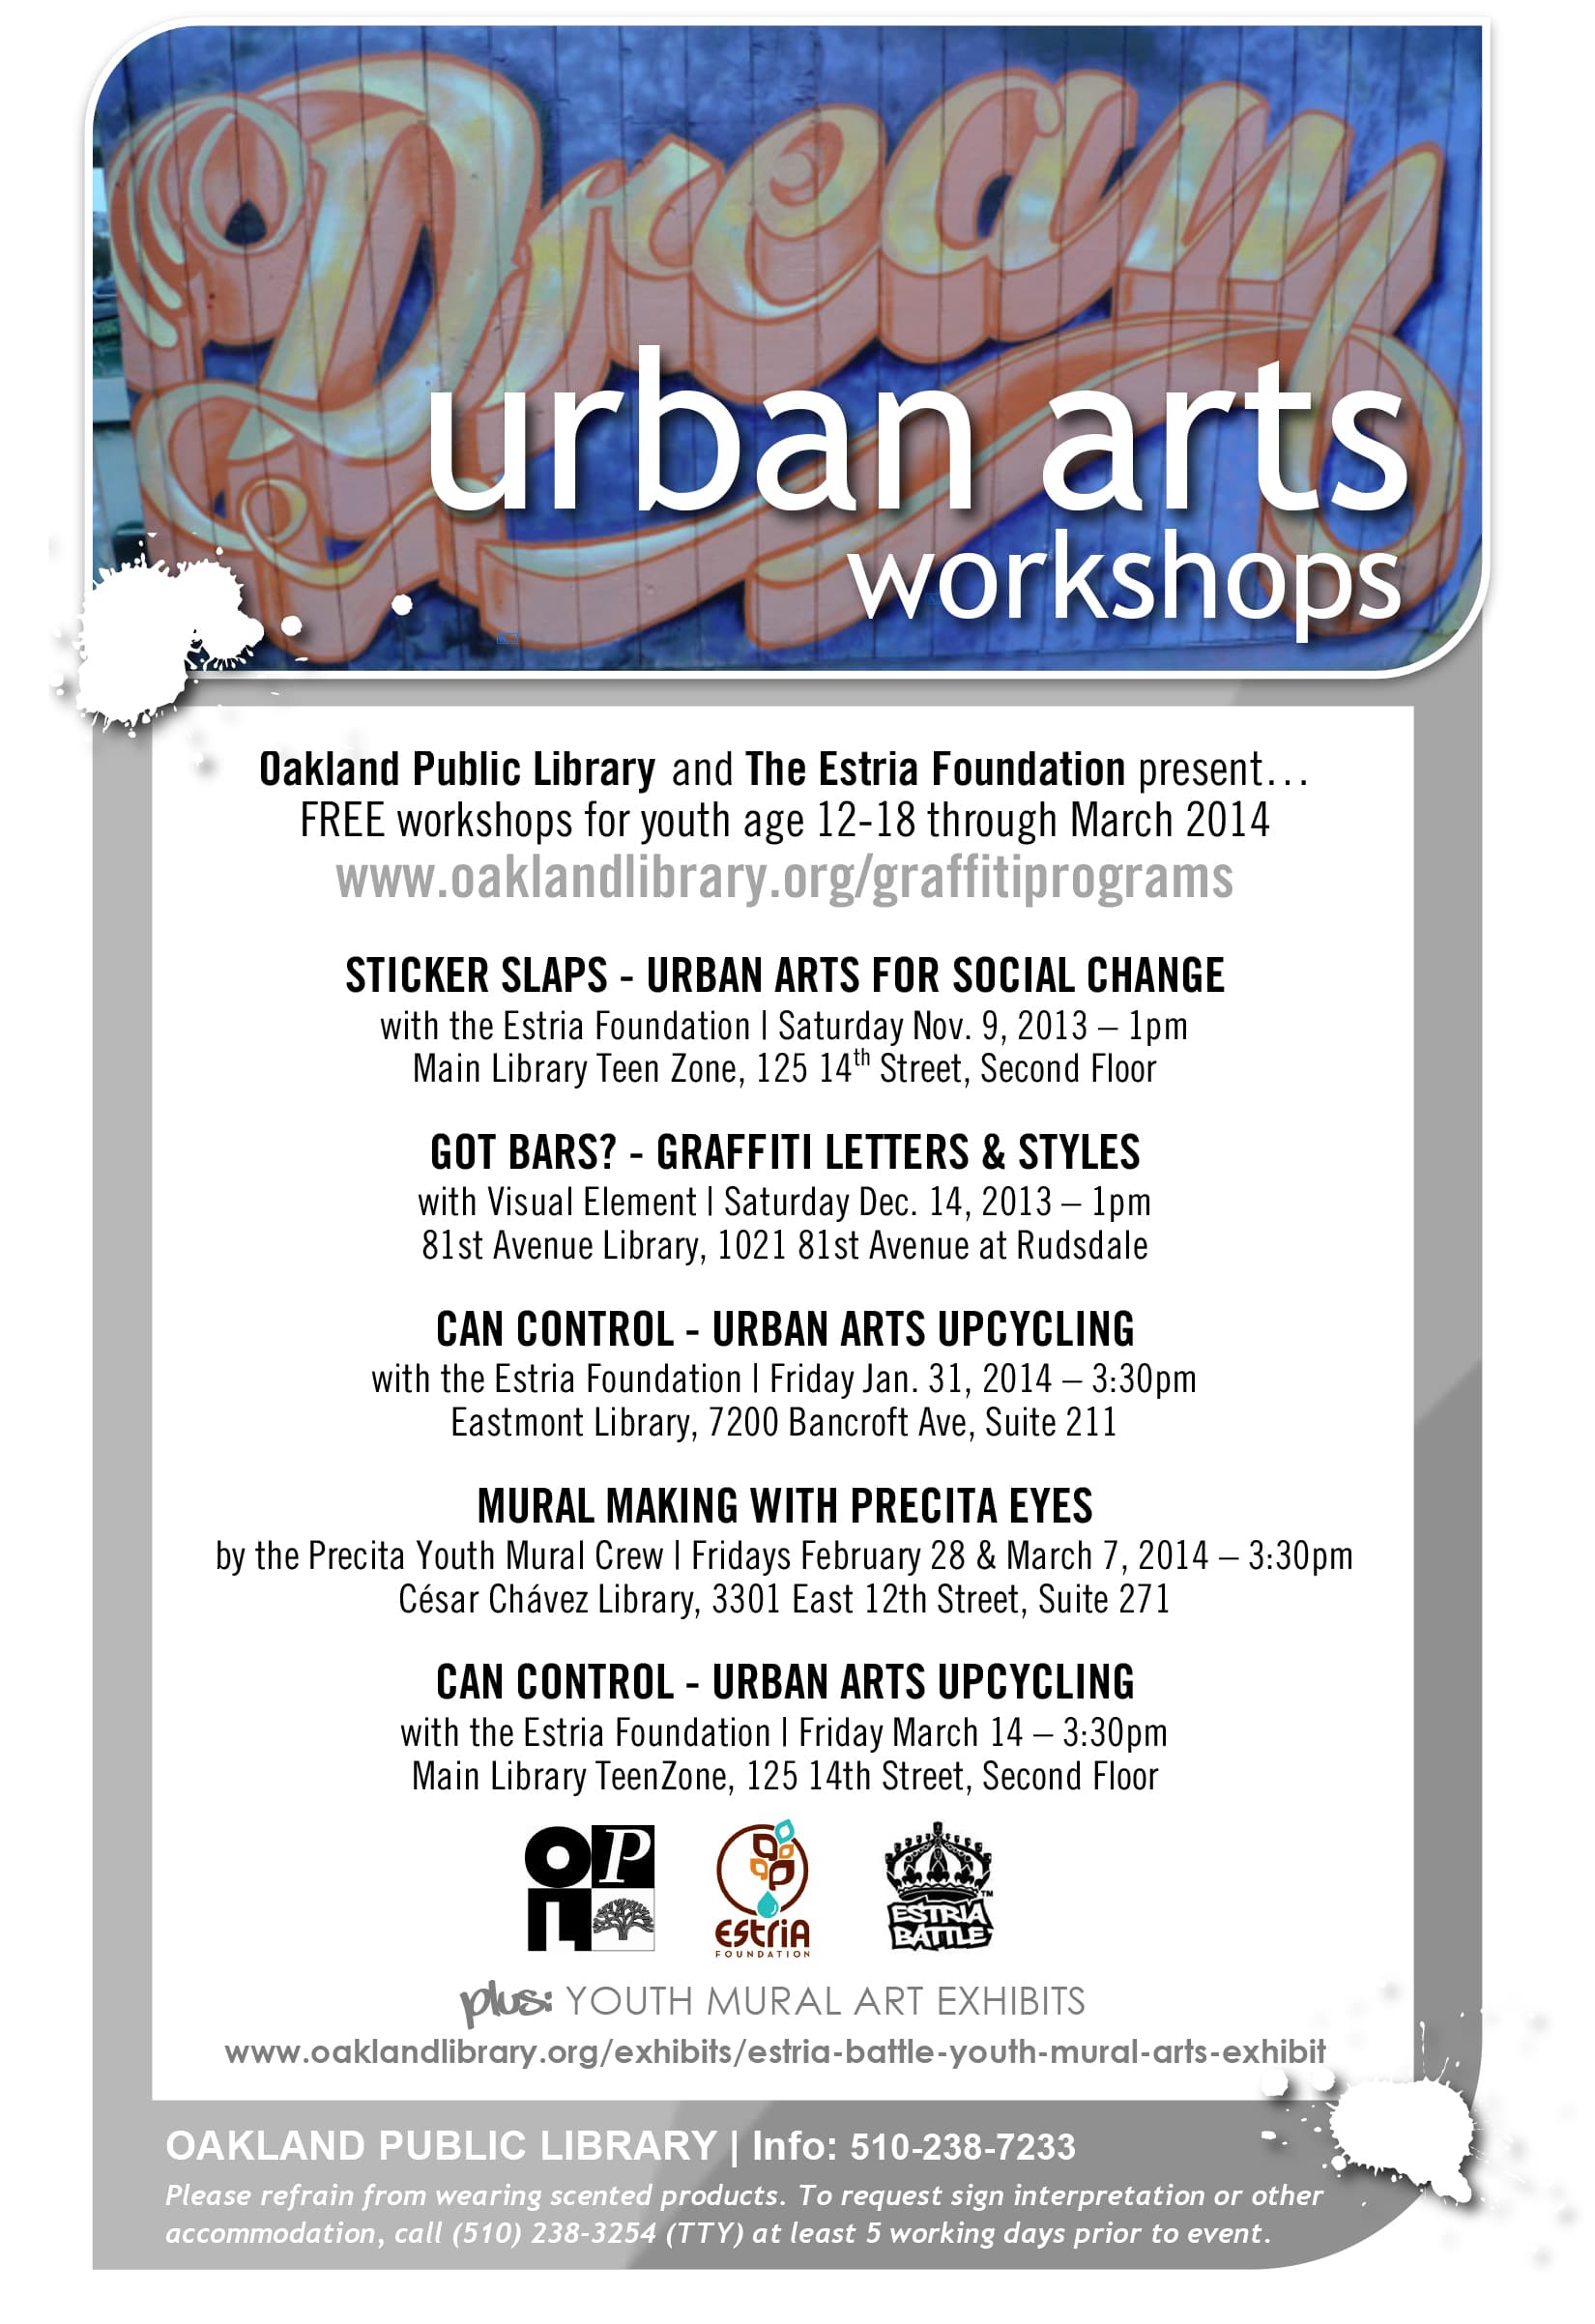 Youth Art Workshops at Oakland Public Libraries